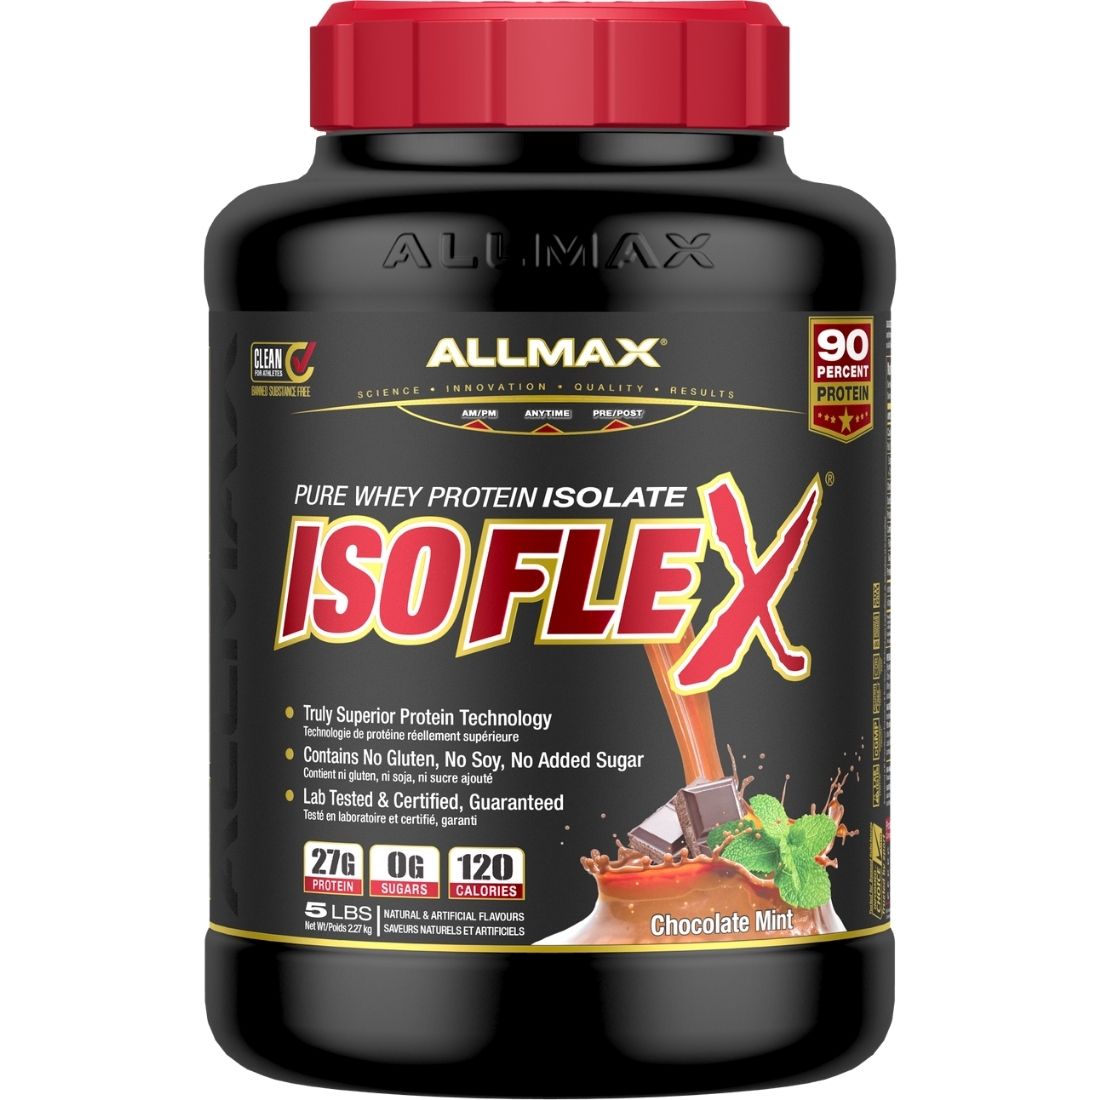 Chocolate Mint 5lb | Allmax Pure Whey Protein Isolate Isoflex // Chocolate Mint flavour